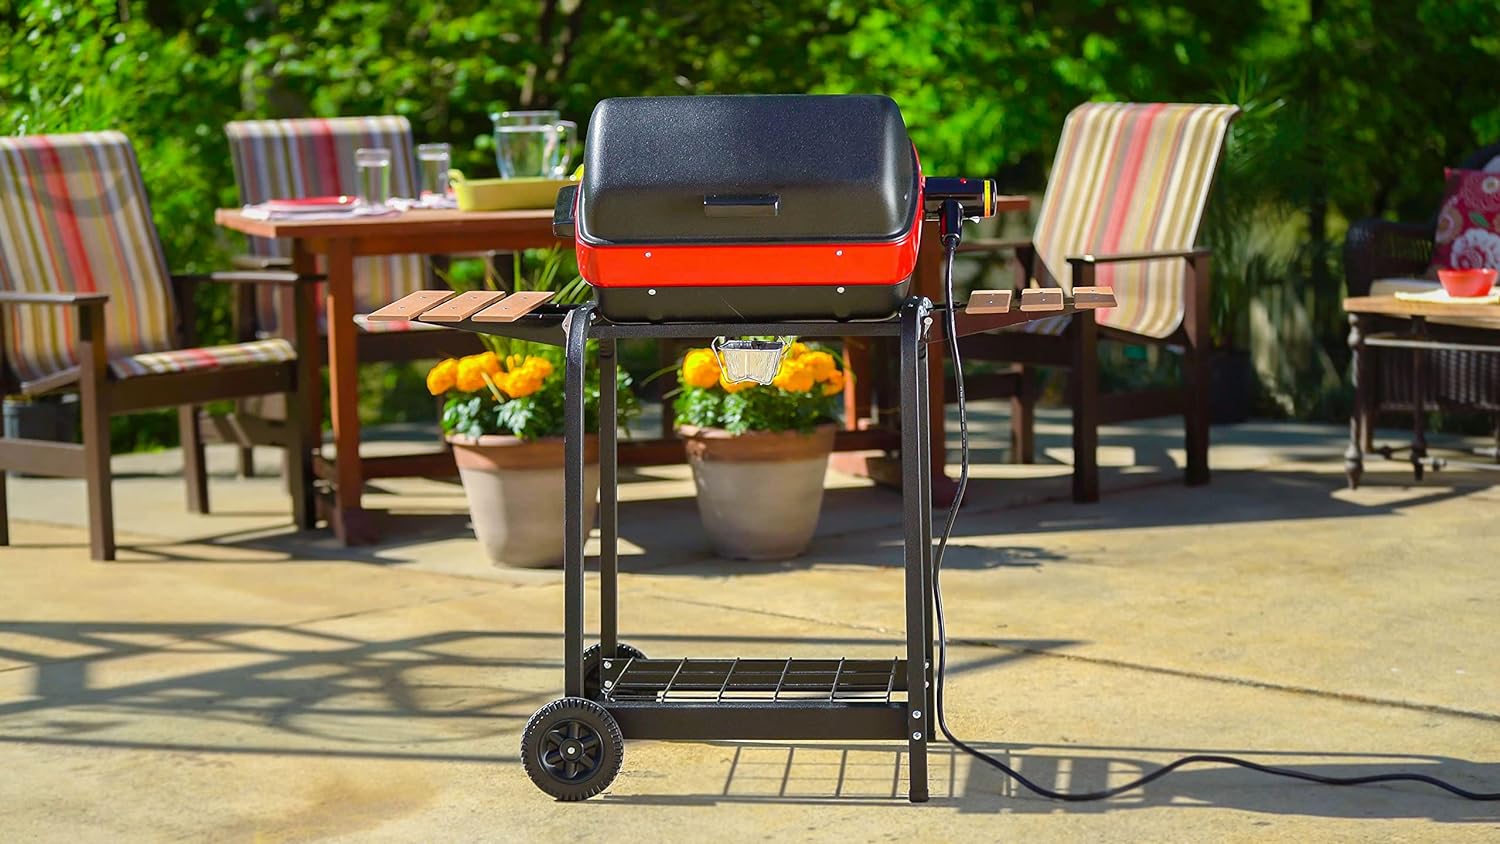 Americana Electric Cart Grill with Side Tables - Americana Electric Cart Grill Review